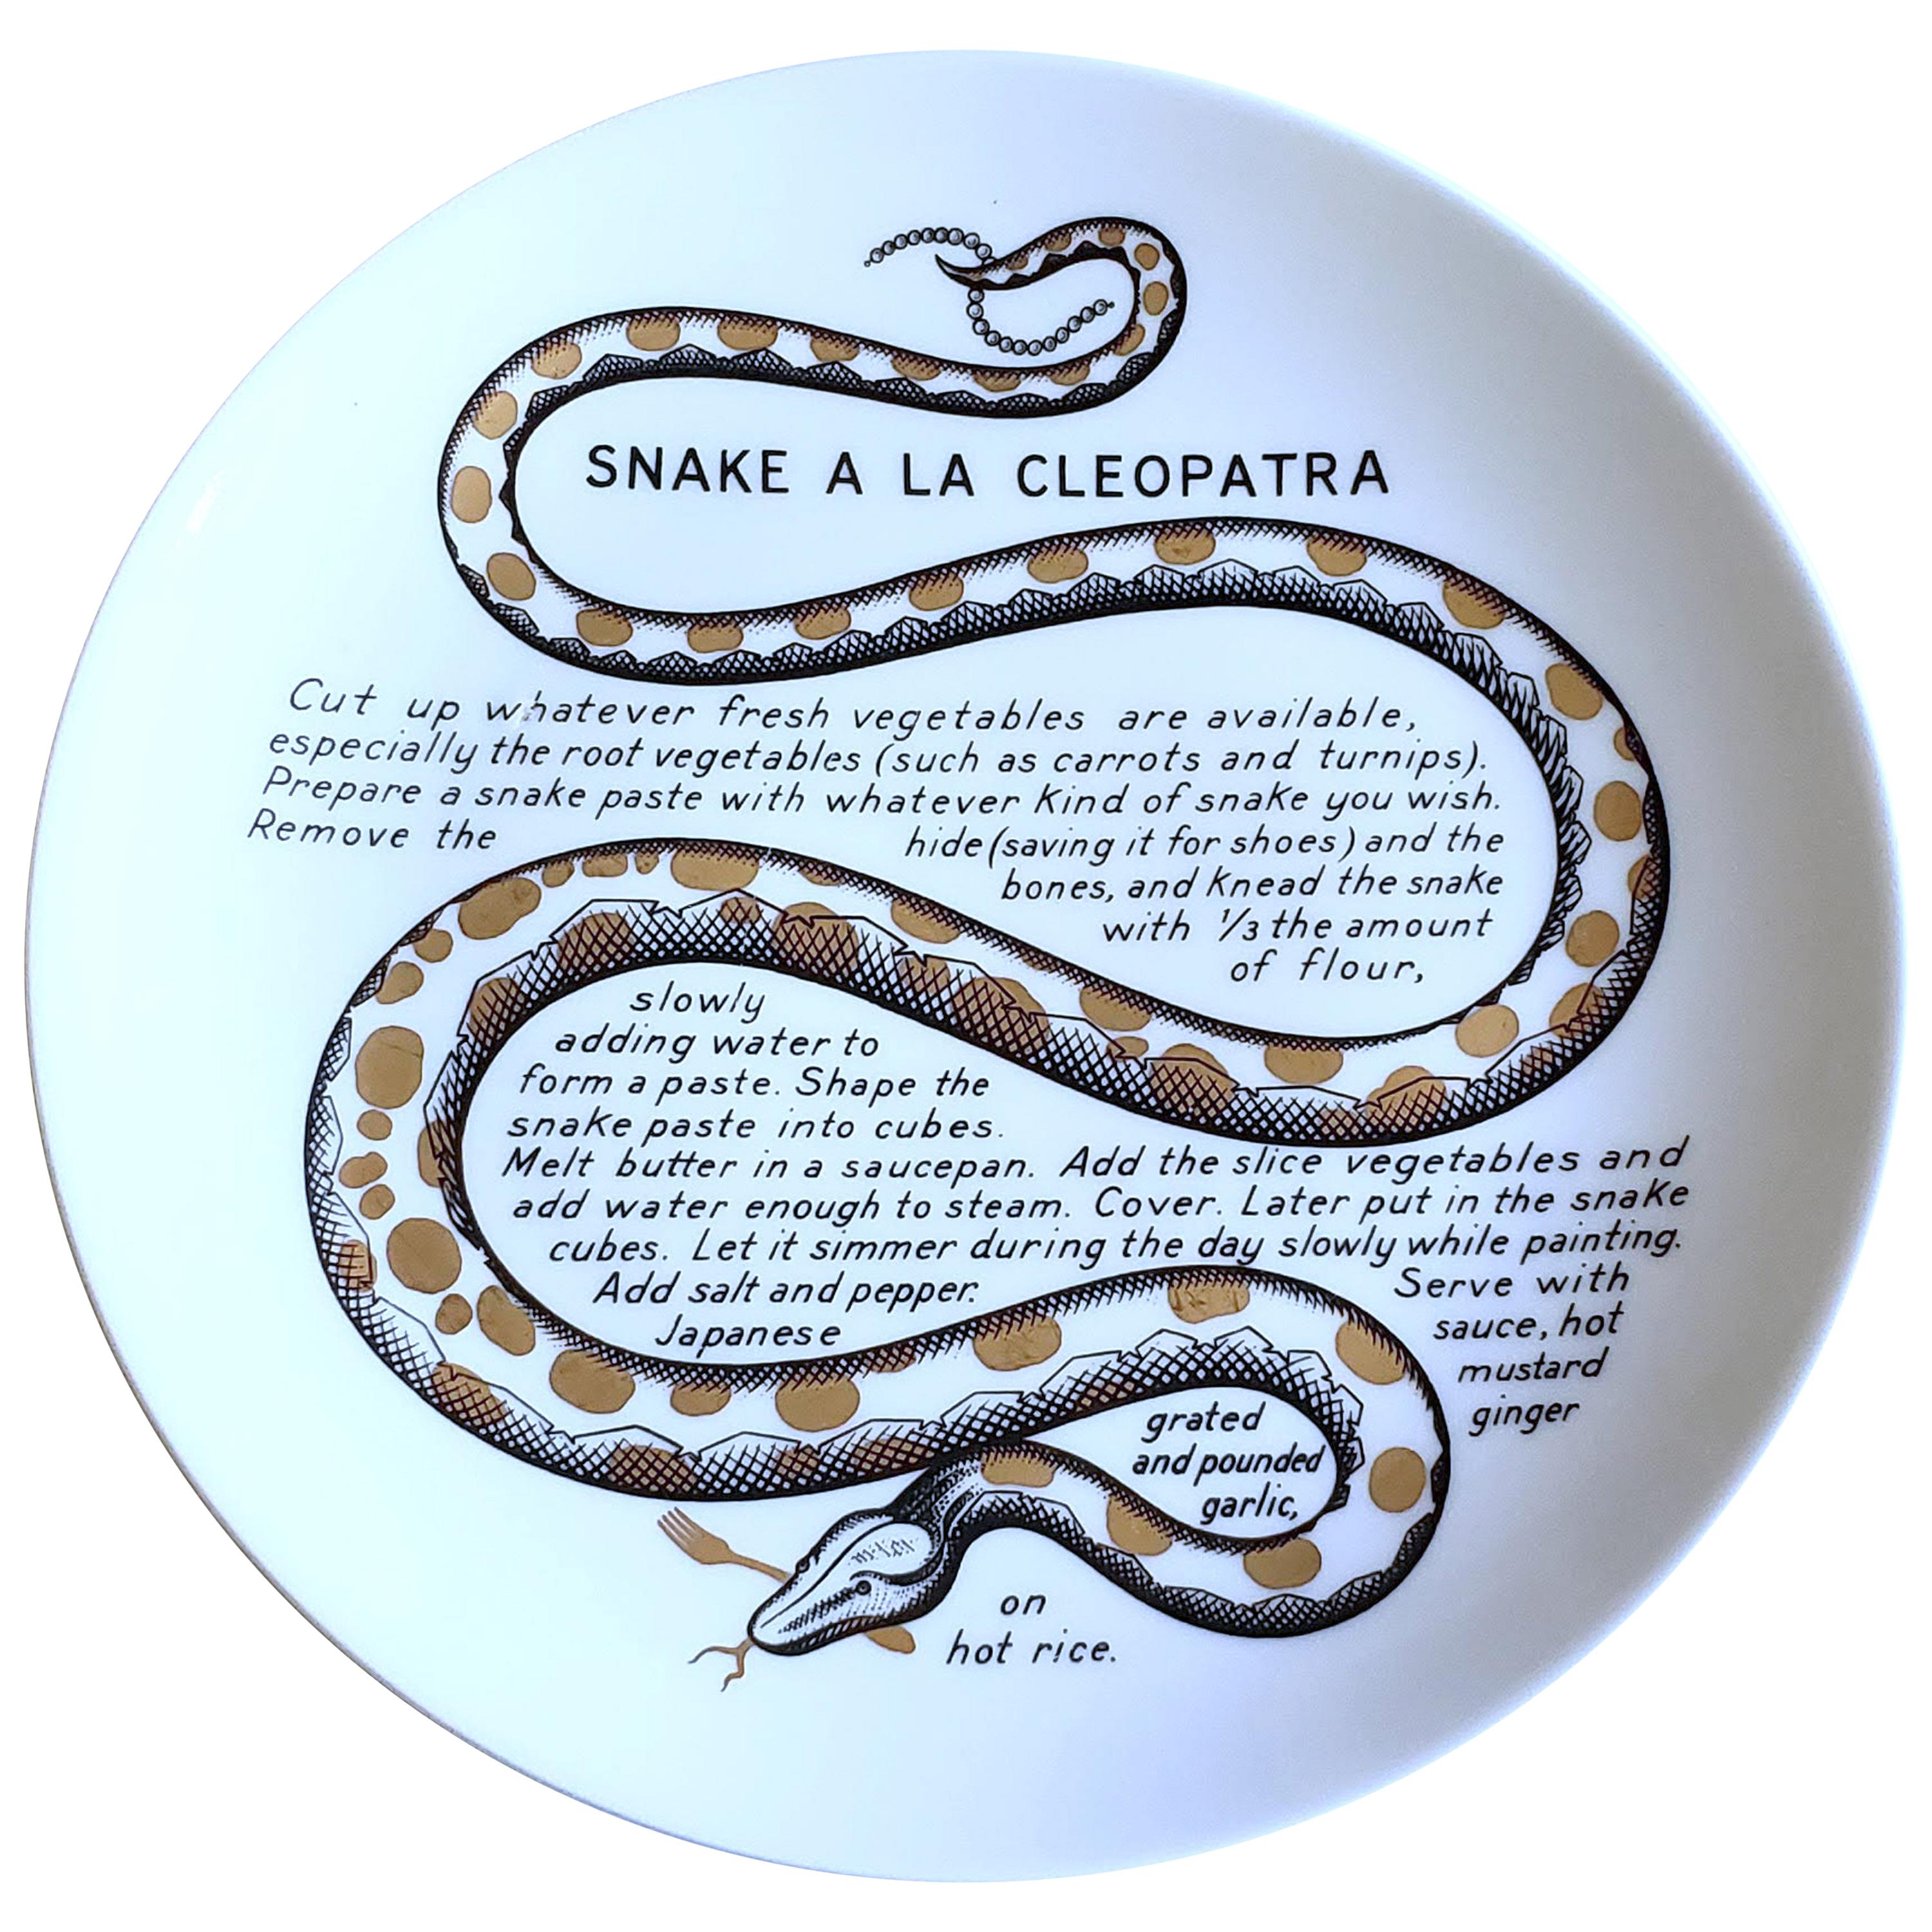 Piero Fornasetti Fleming Joffe Porcelain recipe plate,
Snake a la Cleopatra,
1960s-1974.

This rare Piero Fornasetti porcelain plate is from a series of fourteen made for the Fleming Joffe company in New York City.

The plate originally was in